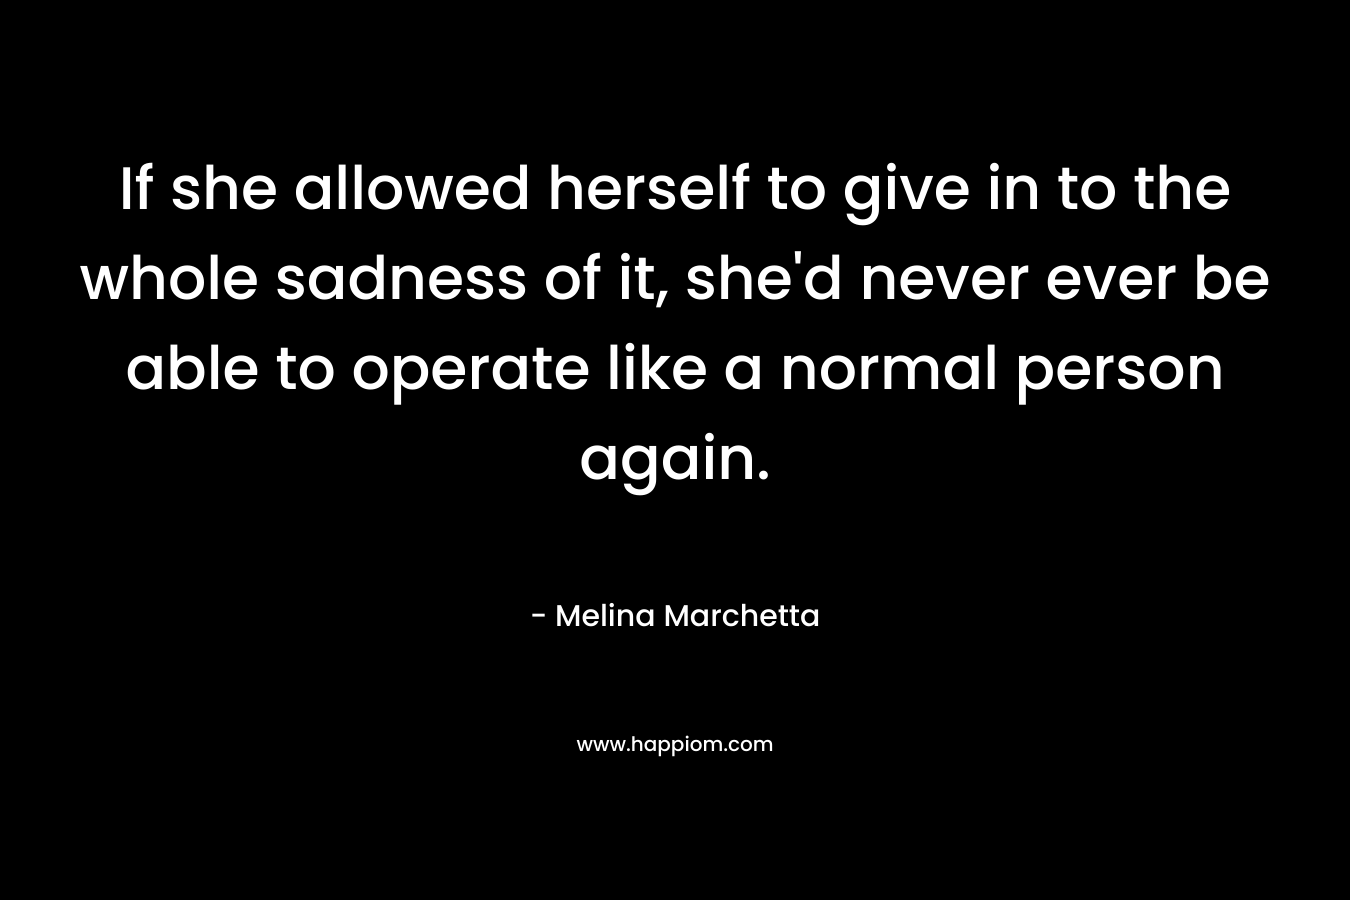 If she allowed herself to give in to the whole sadness of it, she’d never ever be able to operate like a normal person again. – Melina Marchetta